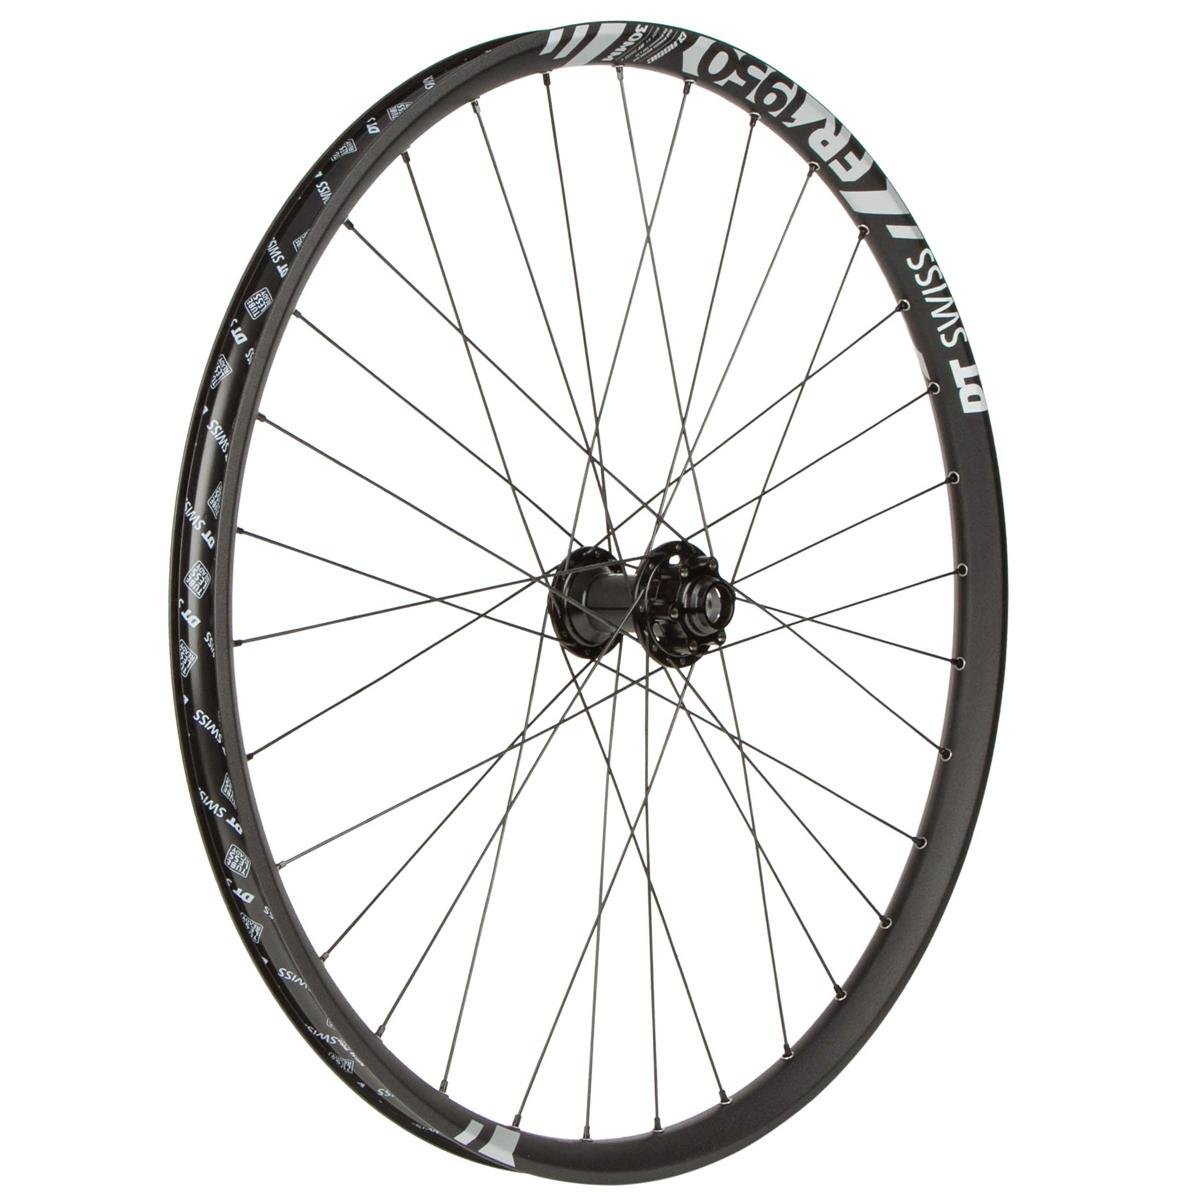 DT Swiss Wheel FR 1950 Classic Front, 27.5 Inches, 20x110 mm TA, Boost, 6-Bolt, 30 mm